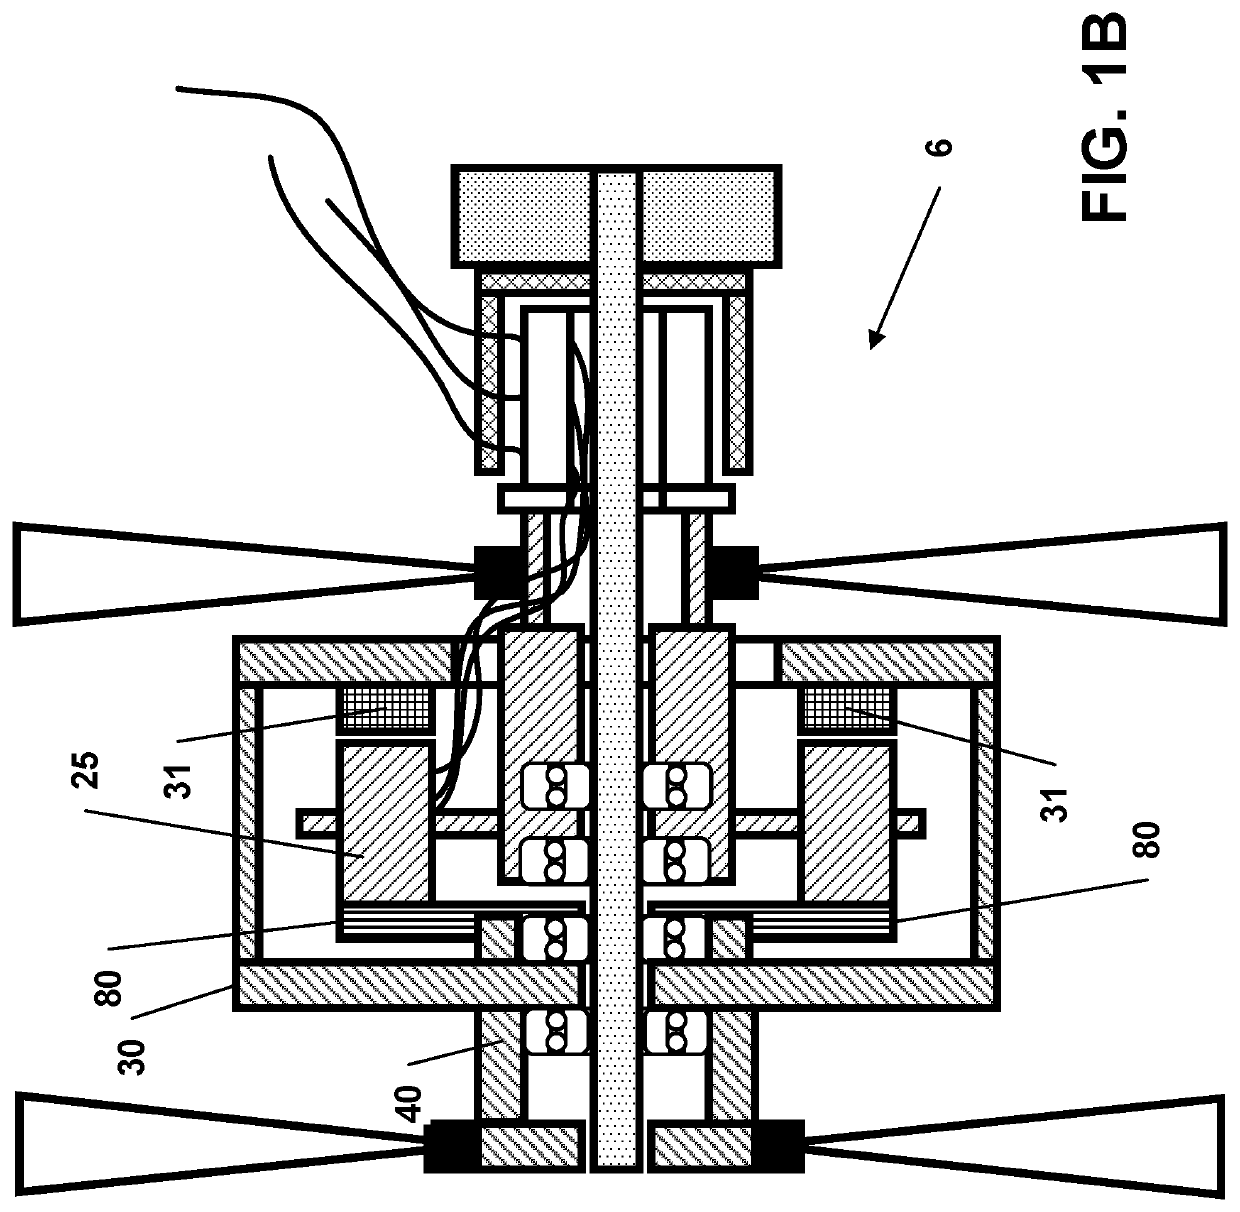 Counter-rotating axial electric motor assembly